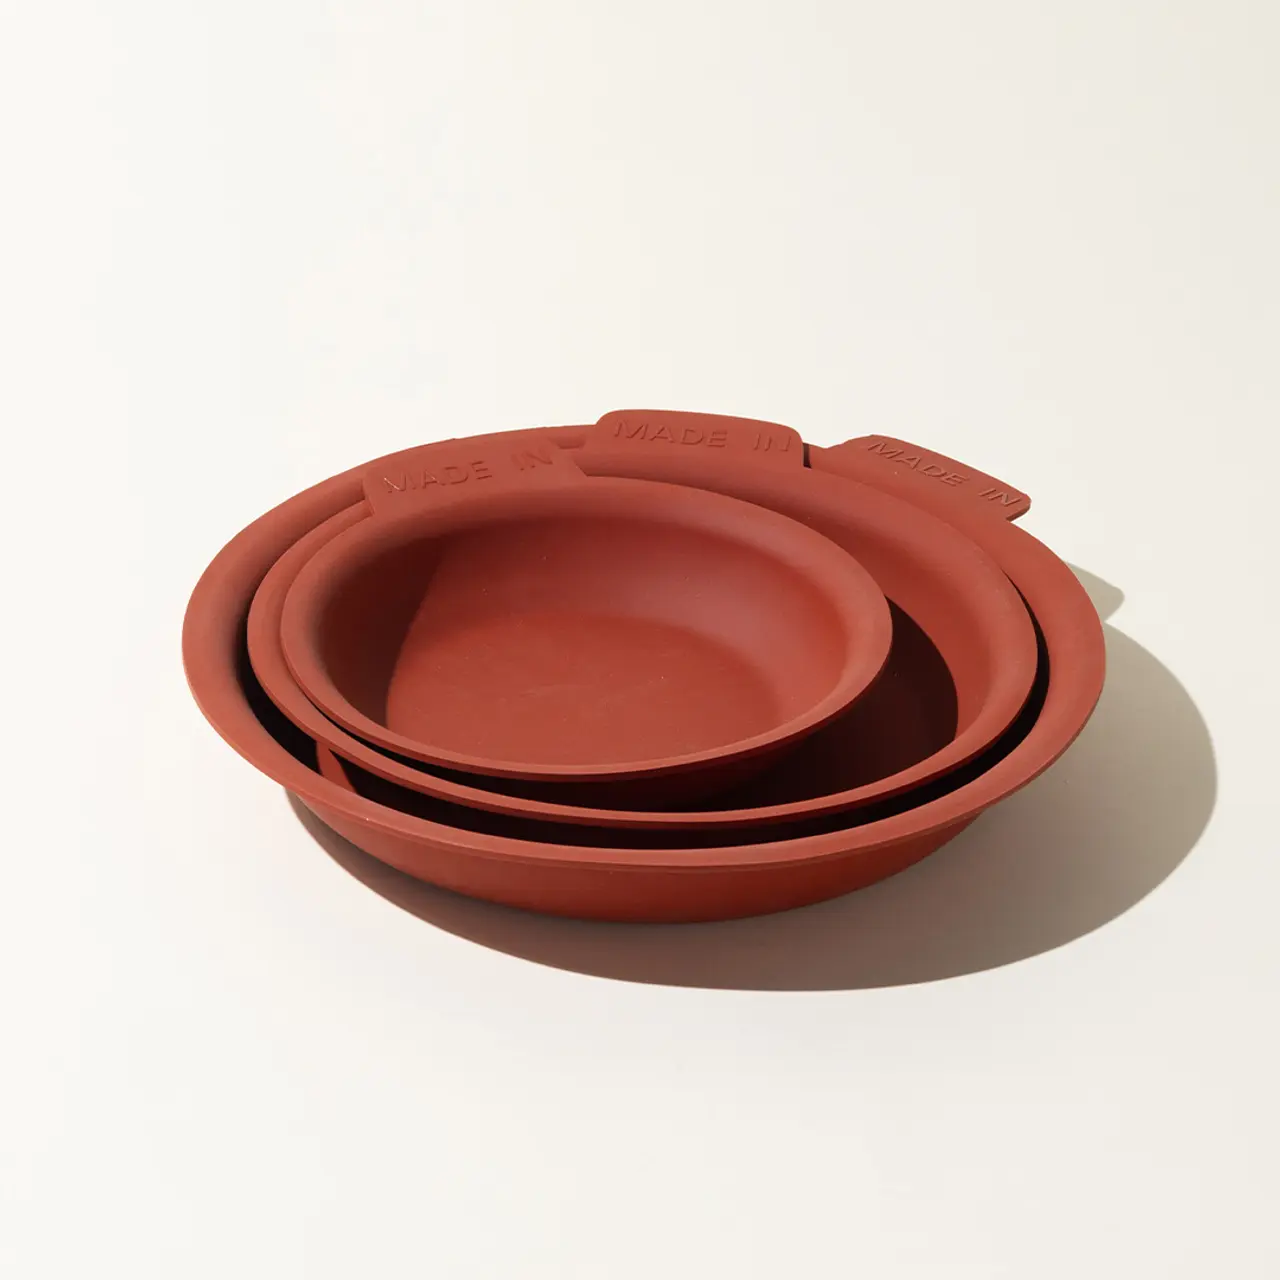 A stack of terracotta bowls in descending sizes casts a soft shadow on a white surface.